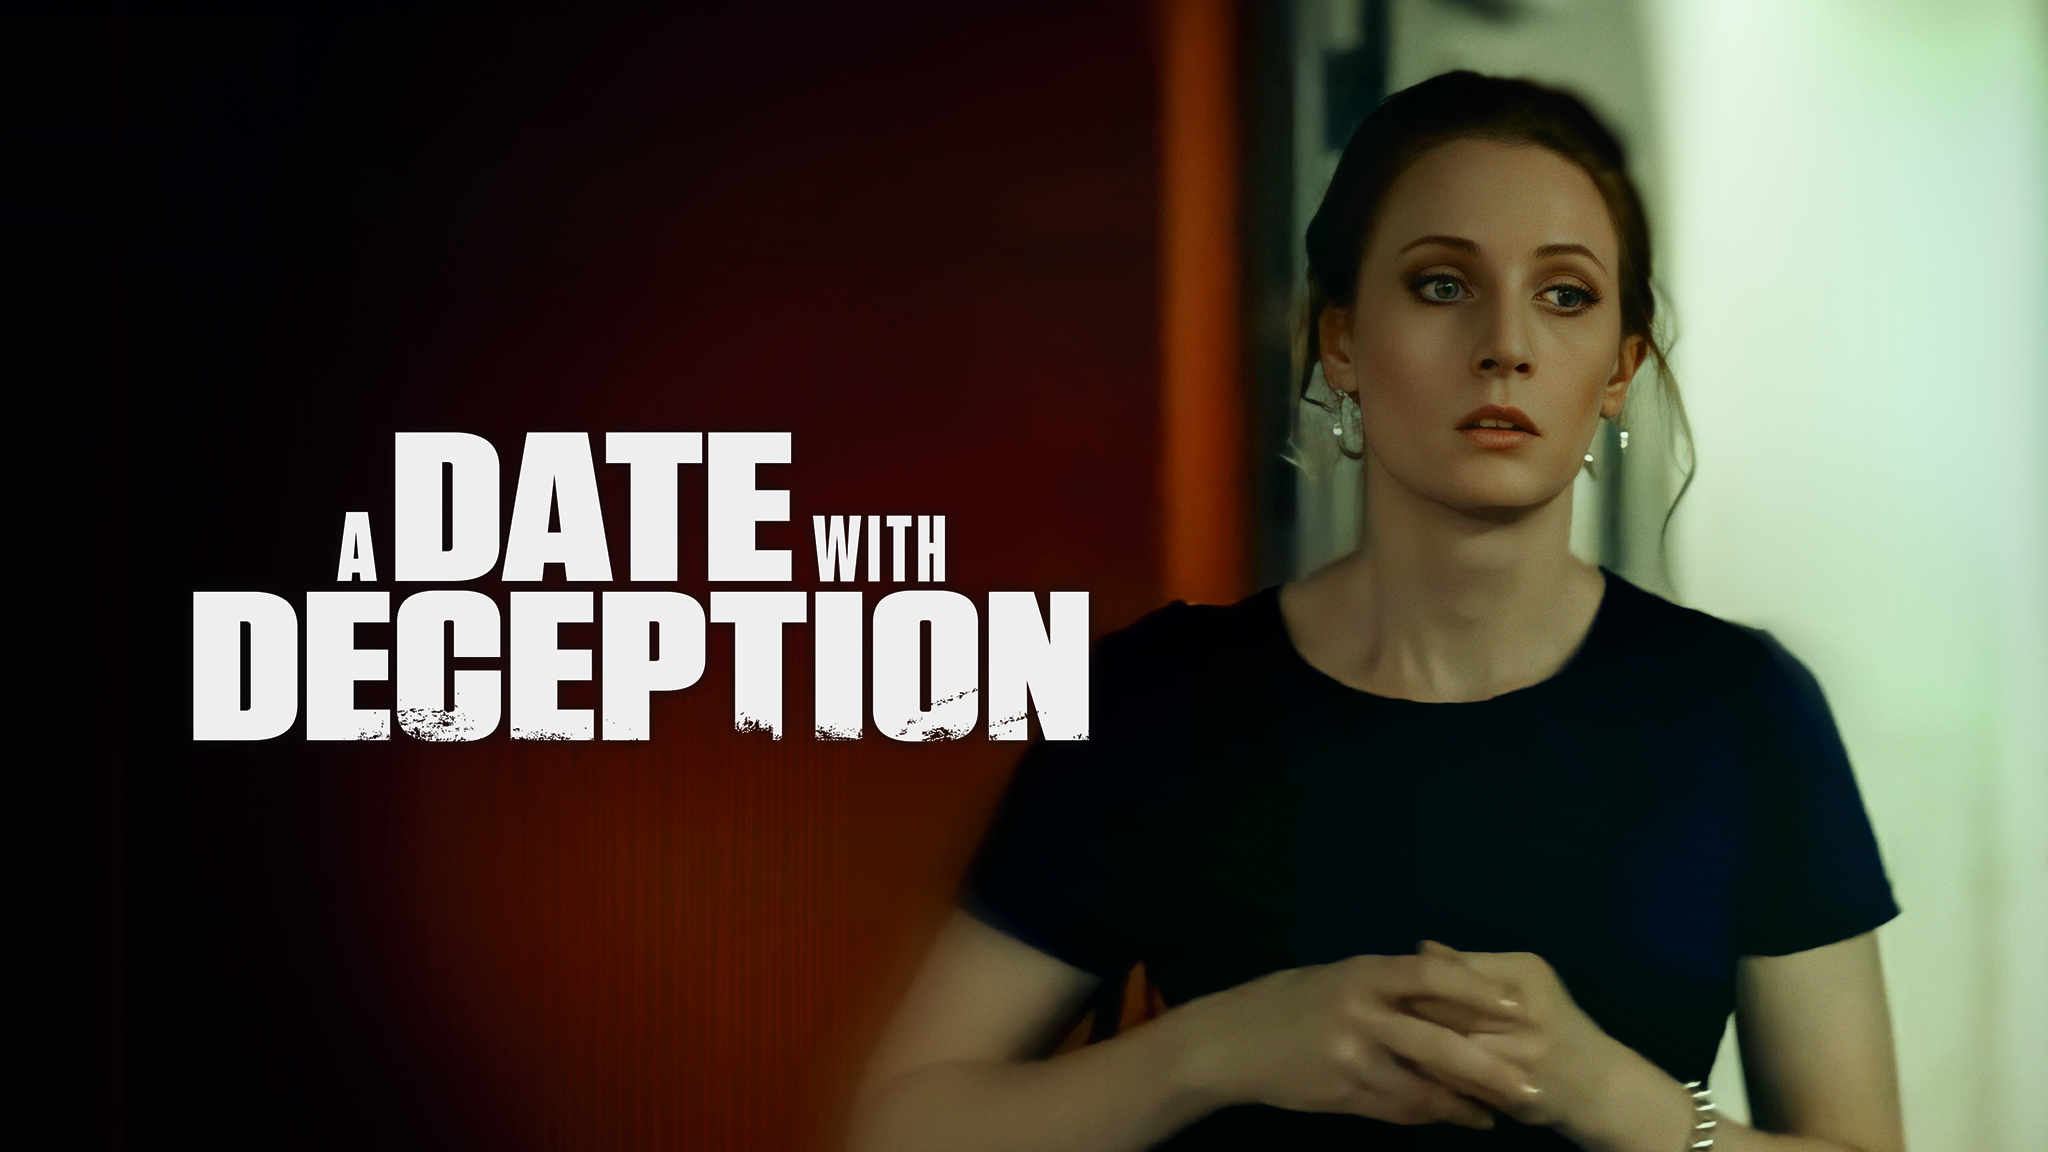 A Date With Deception